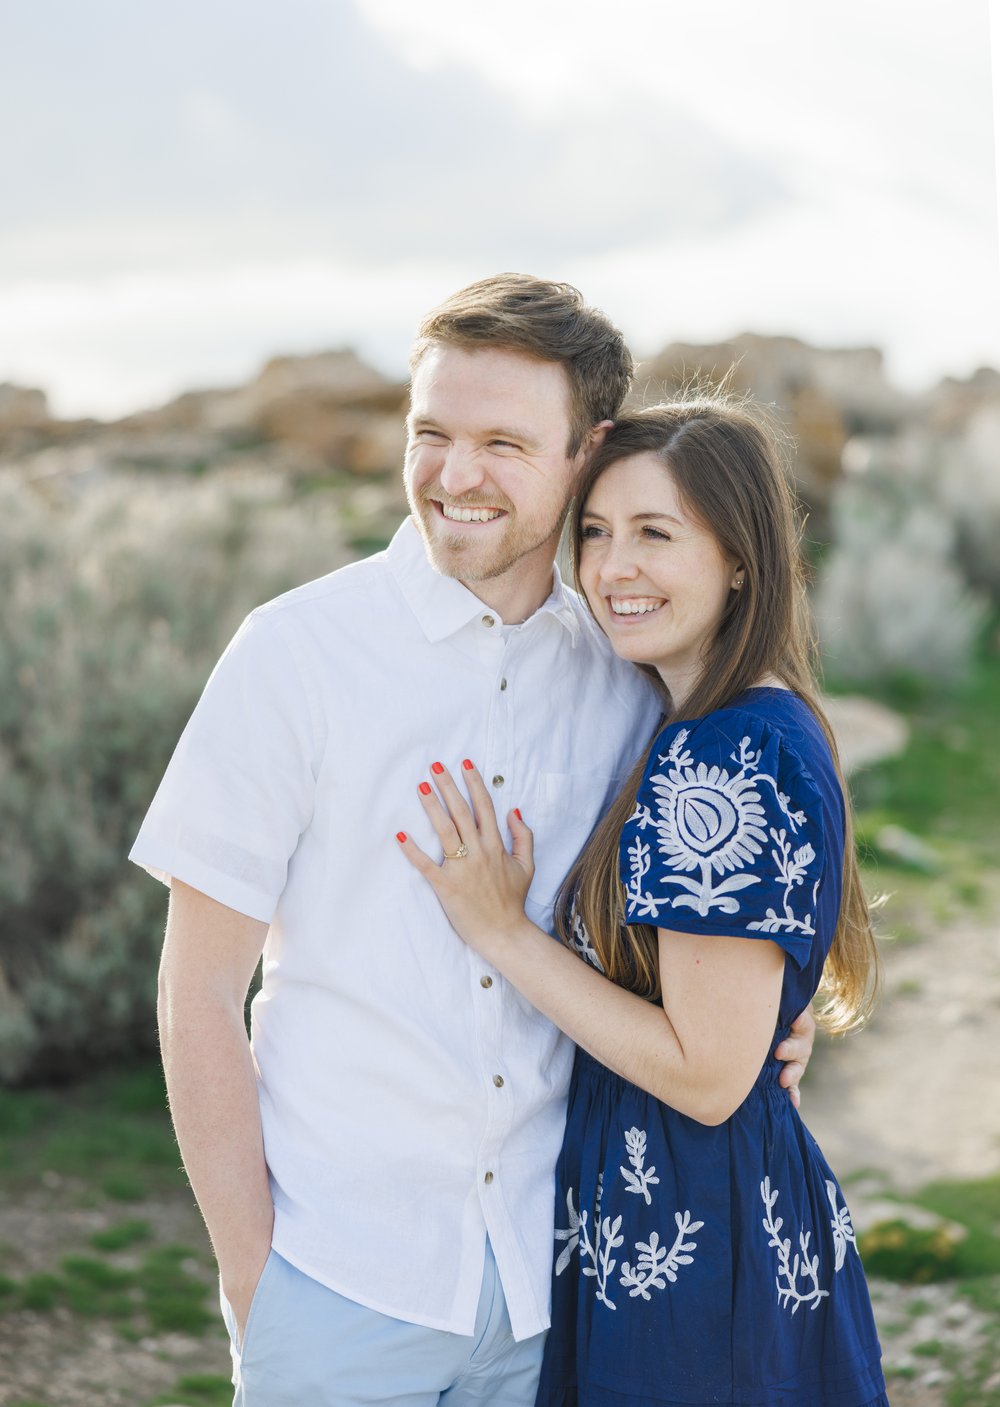  Savanna Richardson Photography captures a portrait of a soon-to-be husband and wife smiling in spring attire. spring engagement outfits blue dress blue shorts simple #SavannaRichardsonPhotography #SavannaRichardsonEngagements #UtahEngagements #Antel